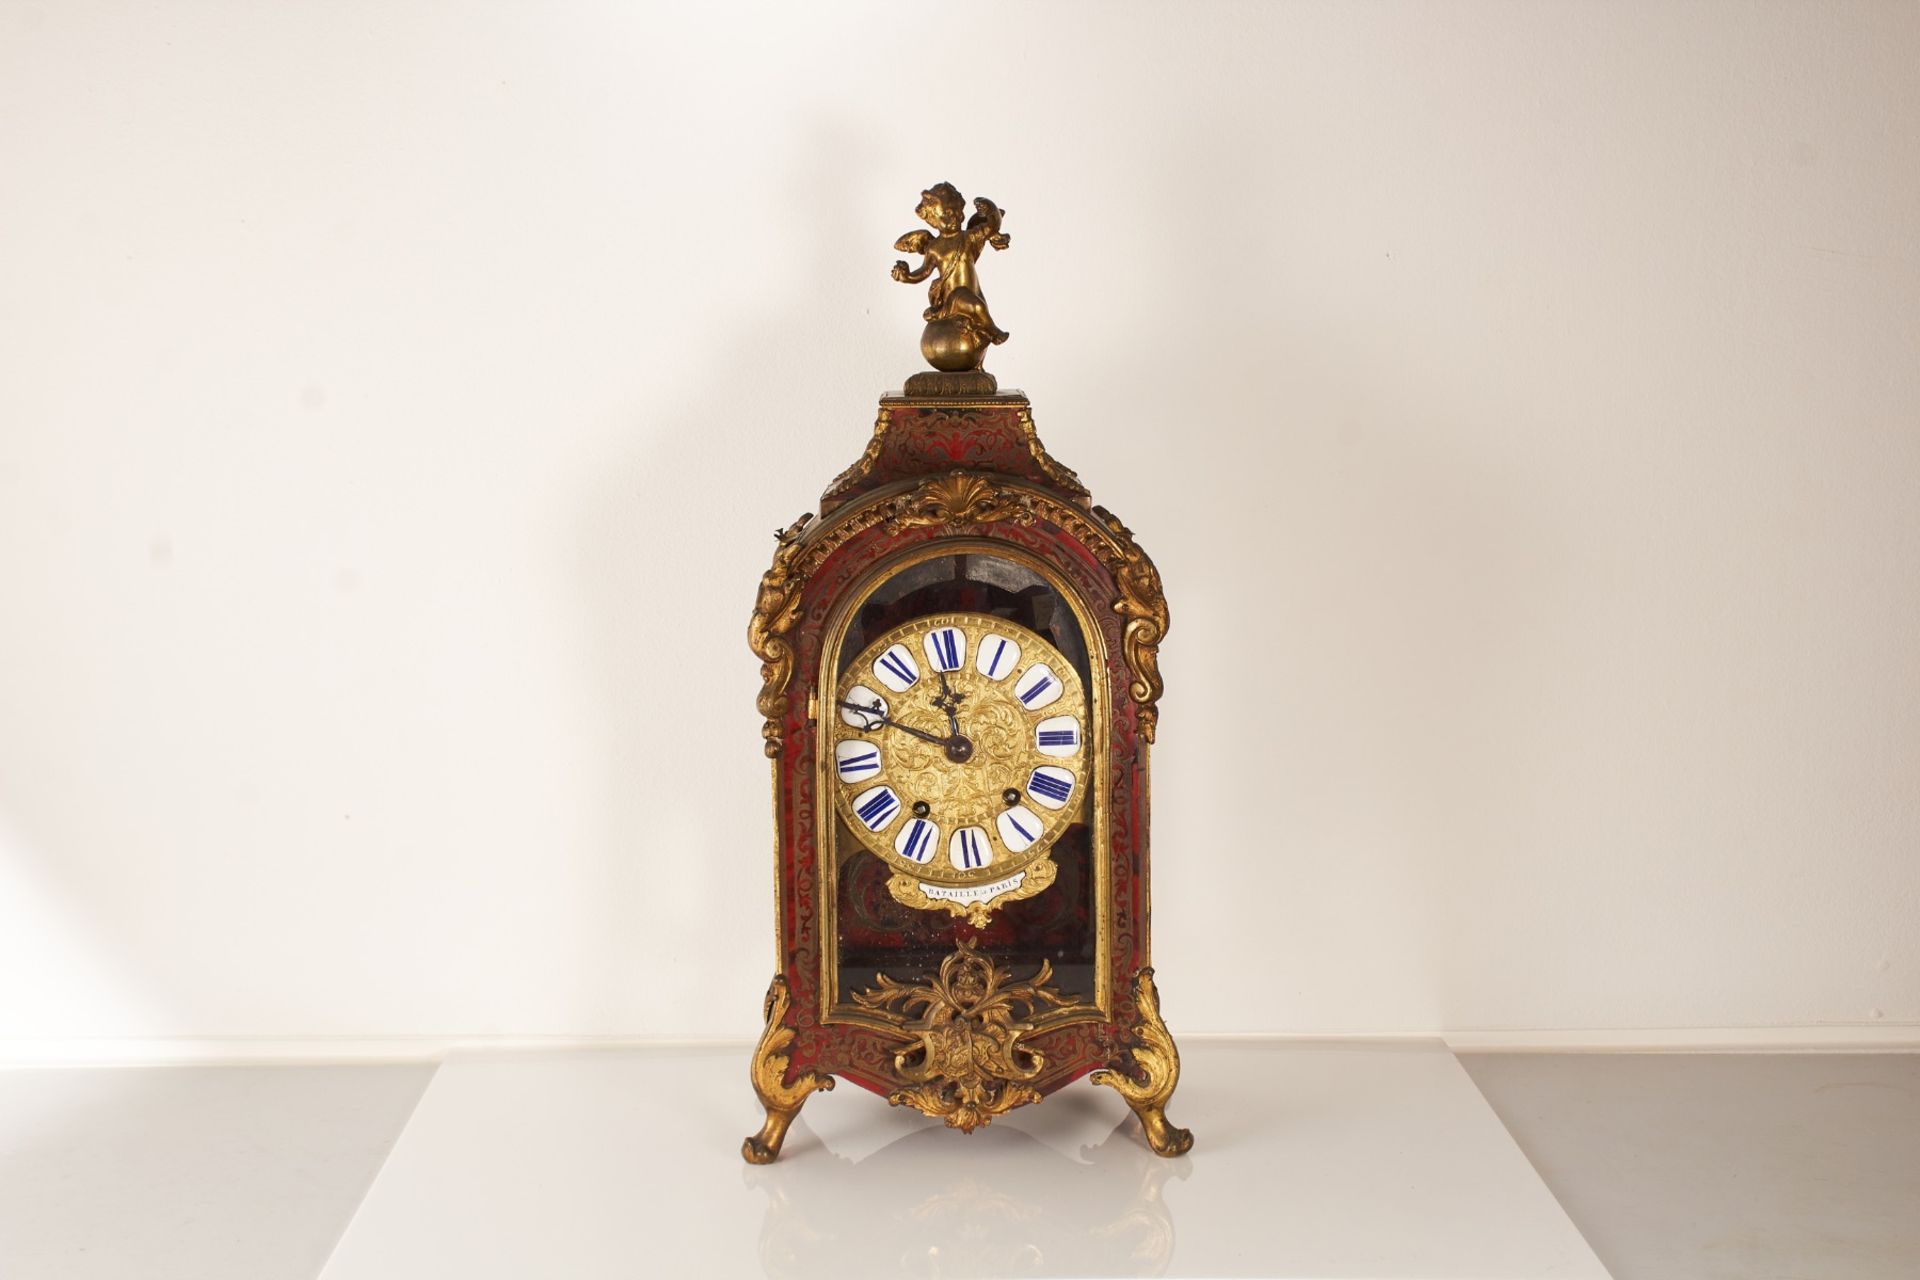 A 19th century French tortoiseshell and gilt bronze mounted Boulle style bracket clock, circa 1860